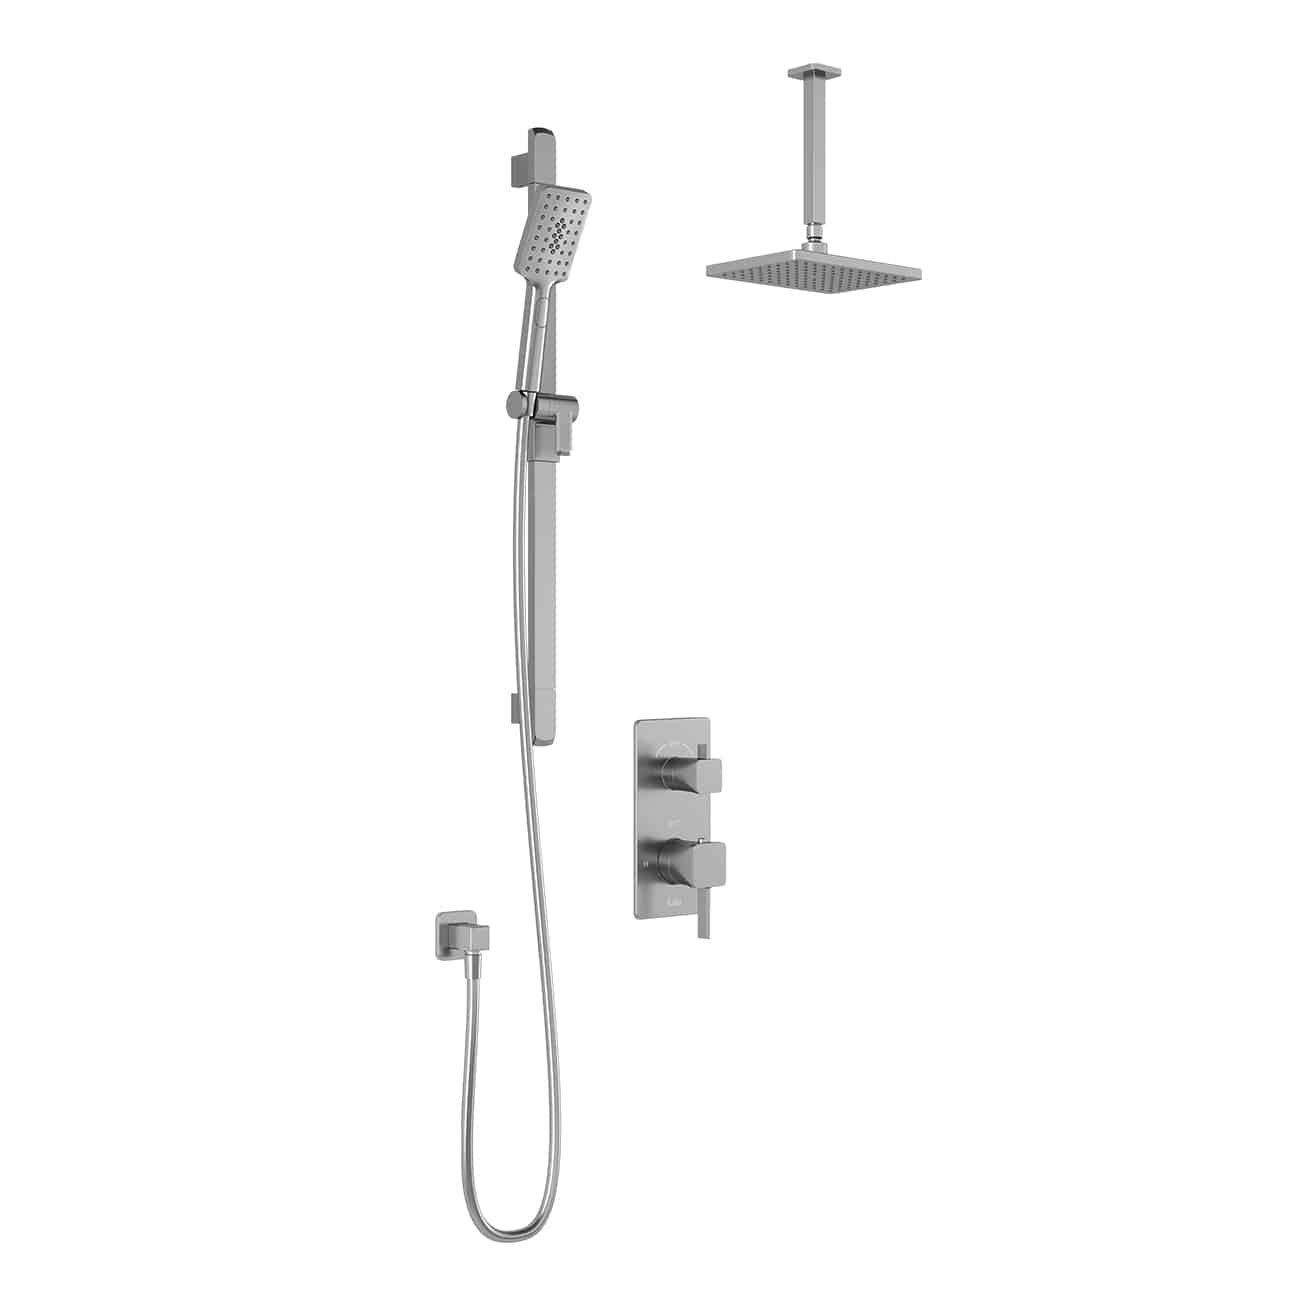 Kalia SquareOne TD2 AQUATONIK T/P with Diverter Shower System with 10-1/4" Shower Head with Vertical Ceiling Arm- (BF1650)